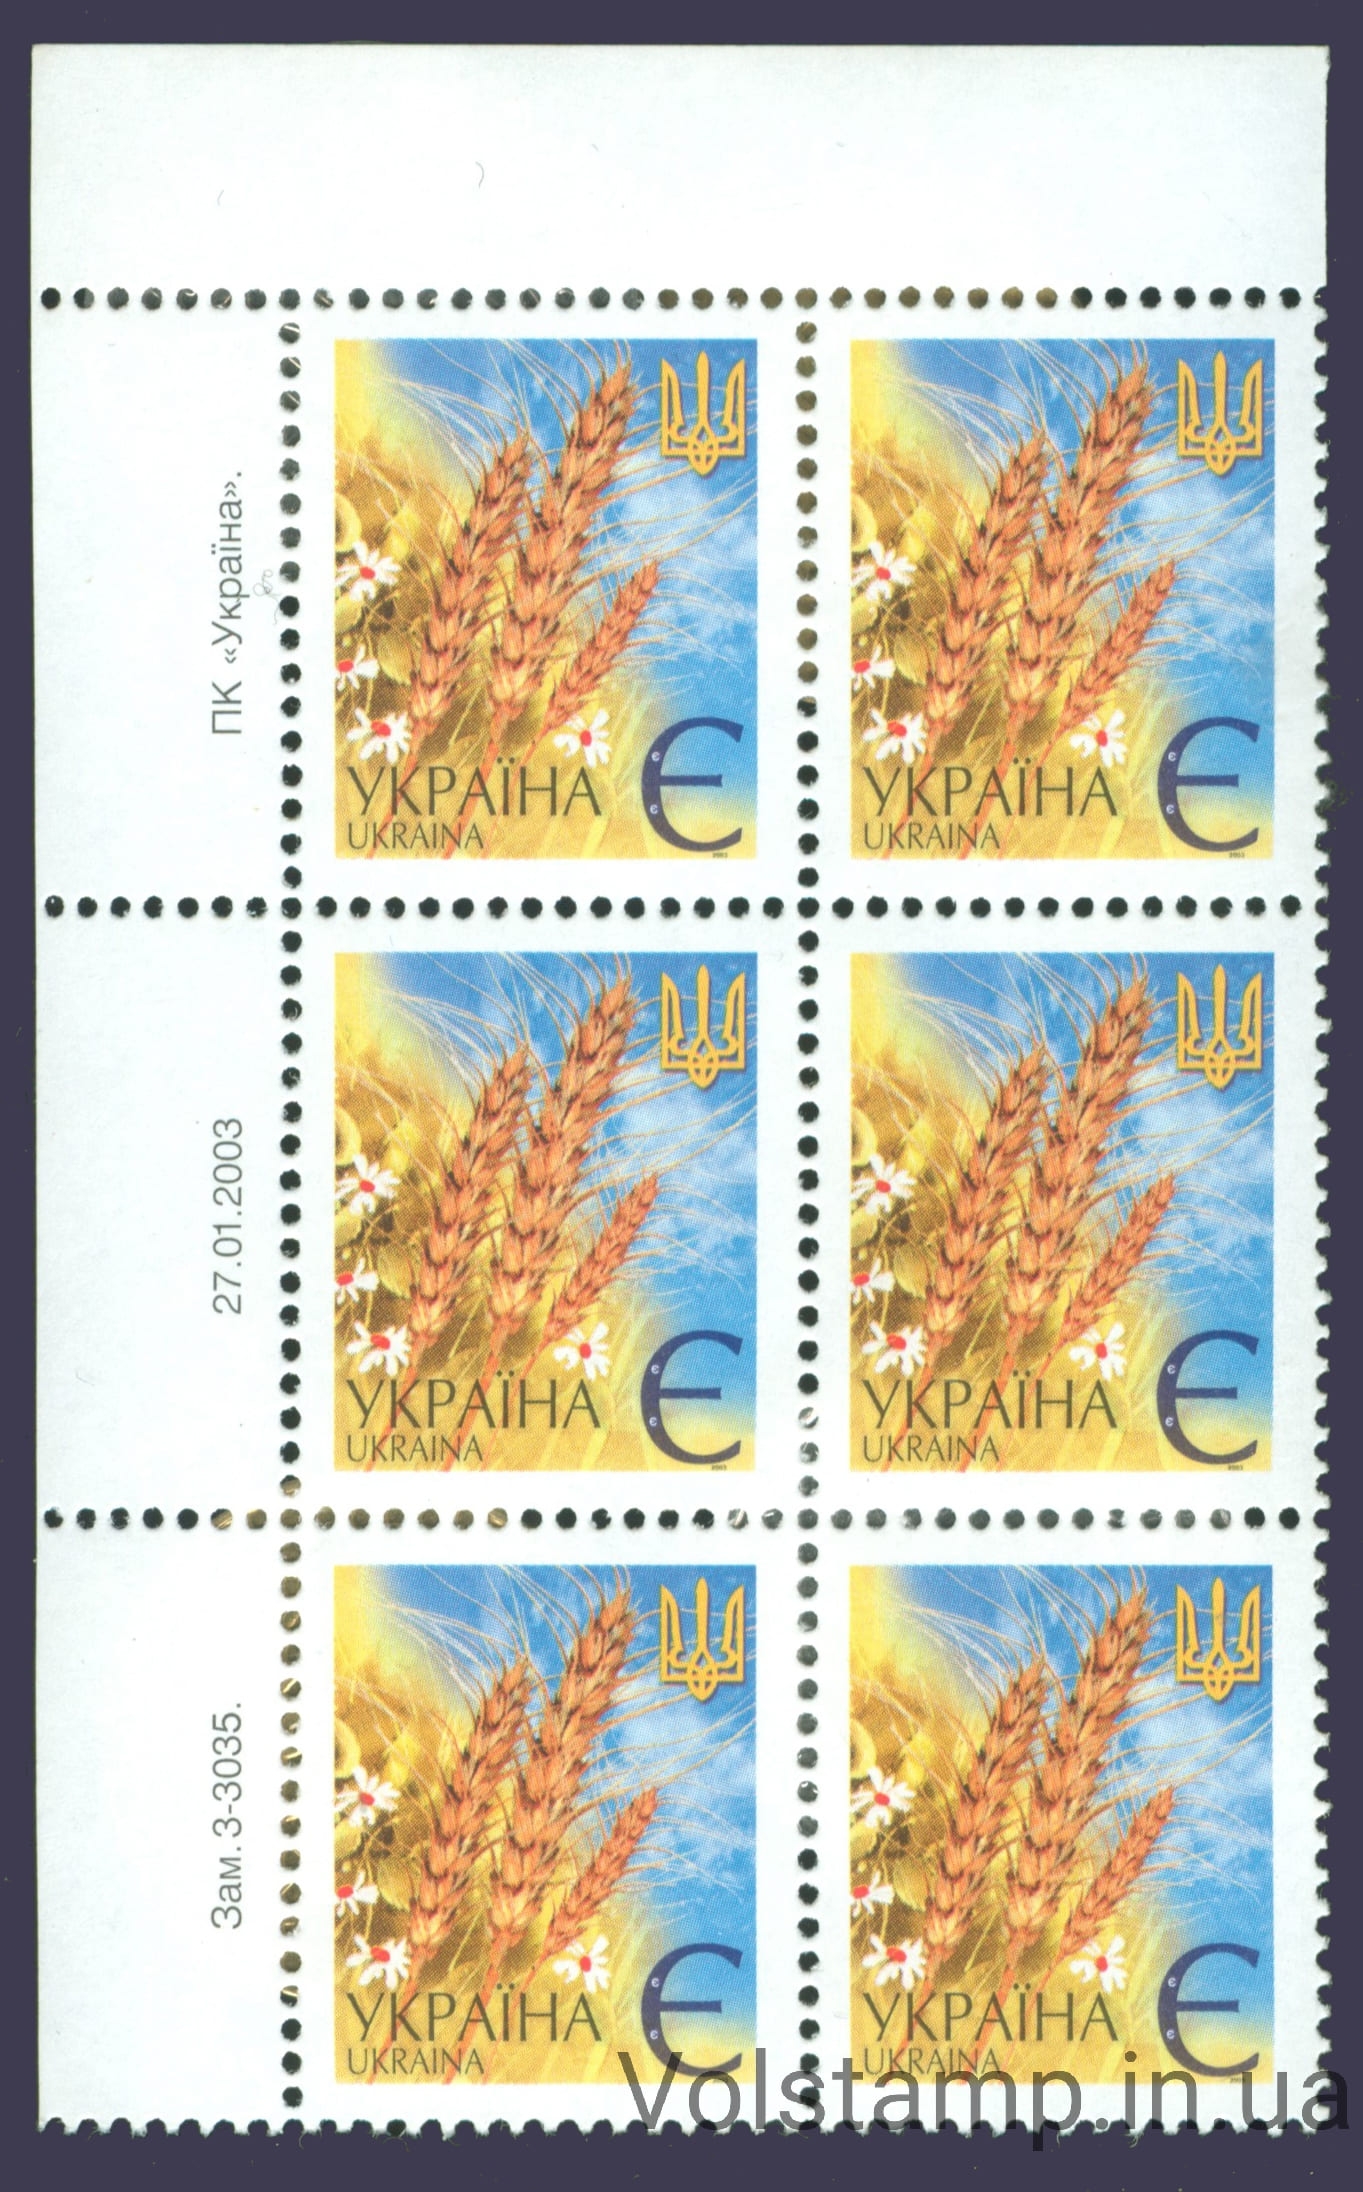 27.01.2003 Standard sixblock E (left top - without perforation) №3-3035